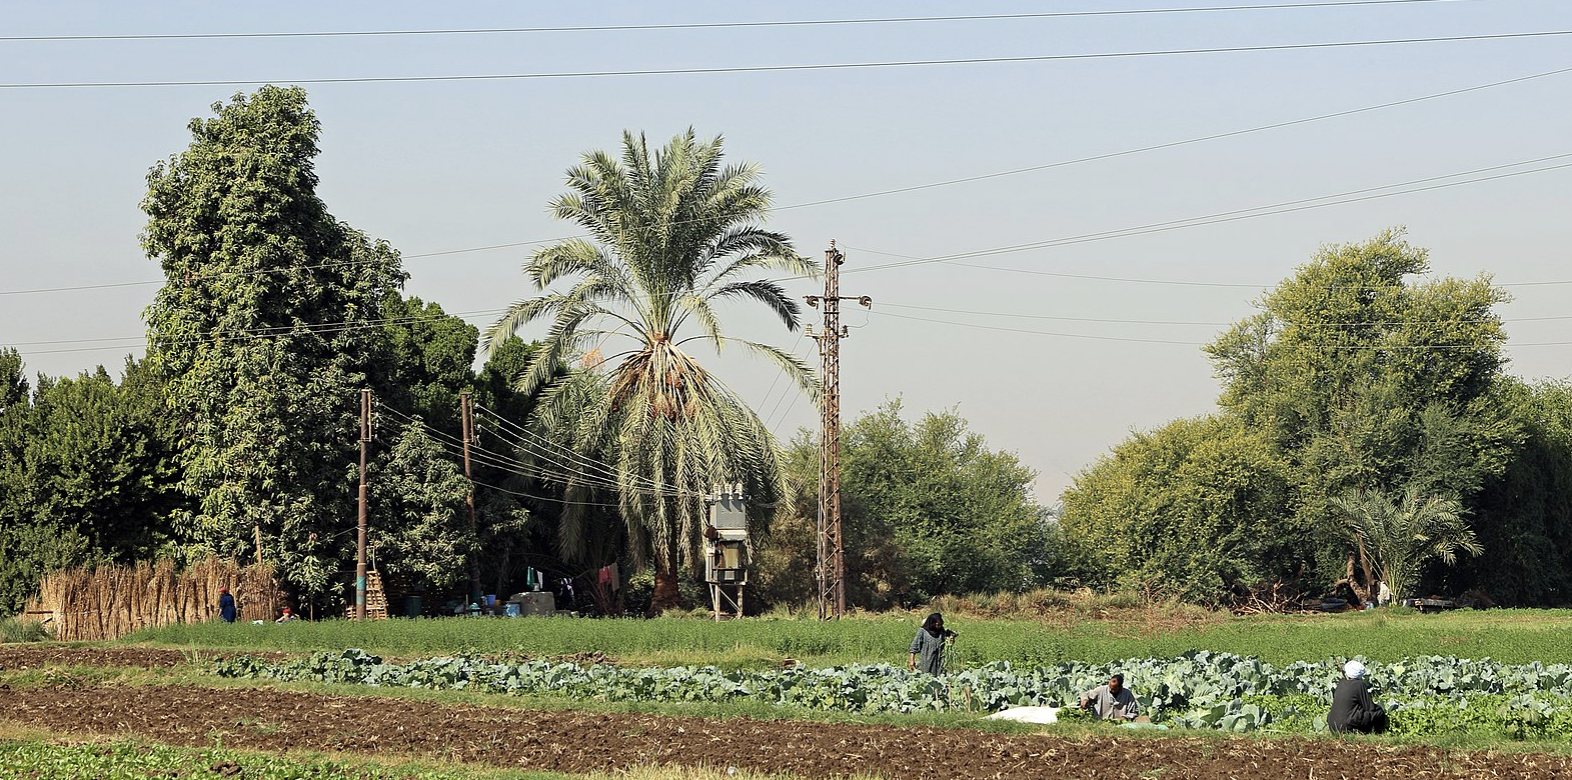 Egypt wants to take advantage of trade opportunities linked to strong Chinese demand for agricultural products